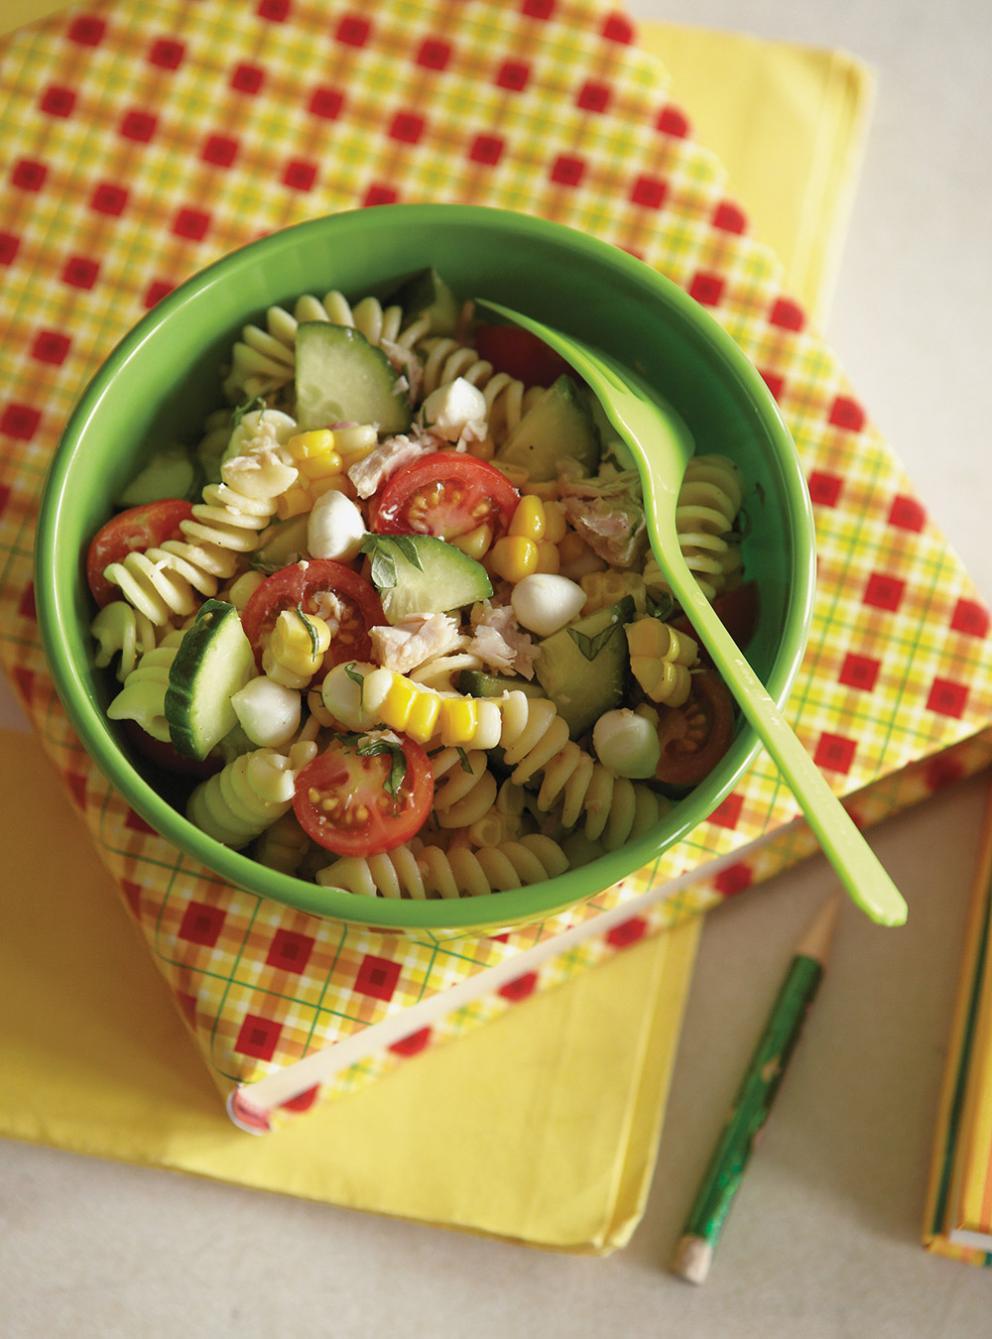 A bowl of pasta salad with a spoon

Description automatically generated